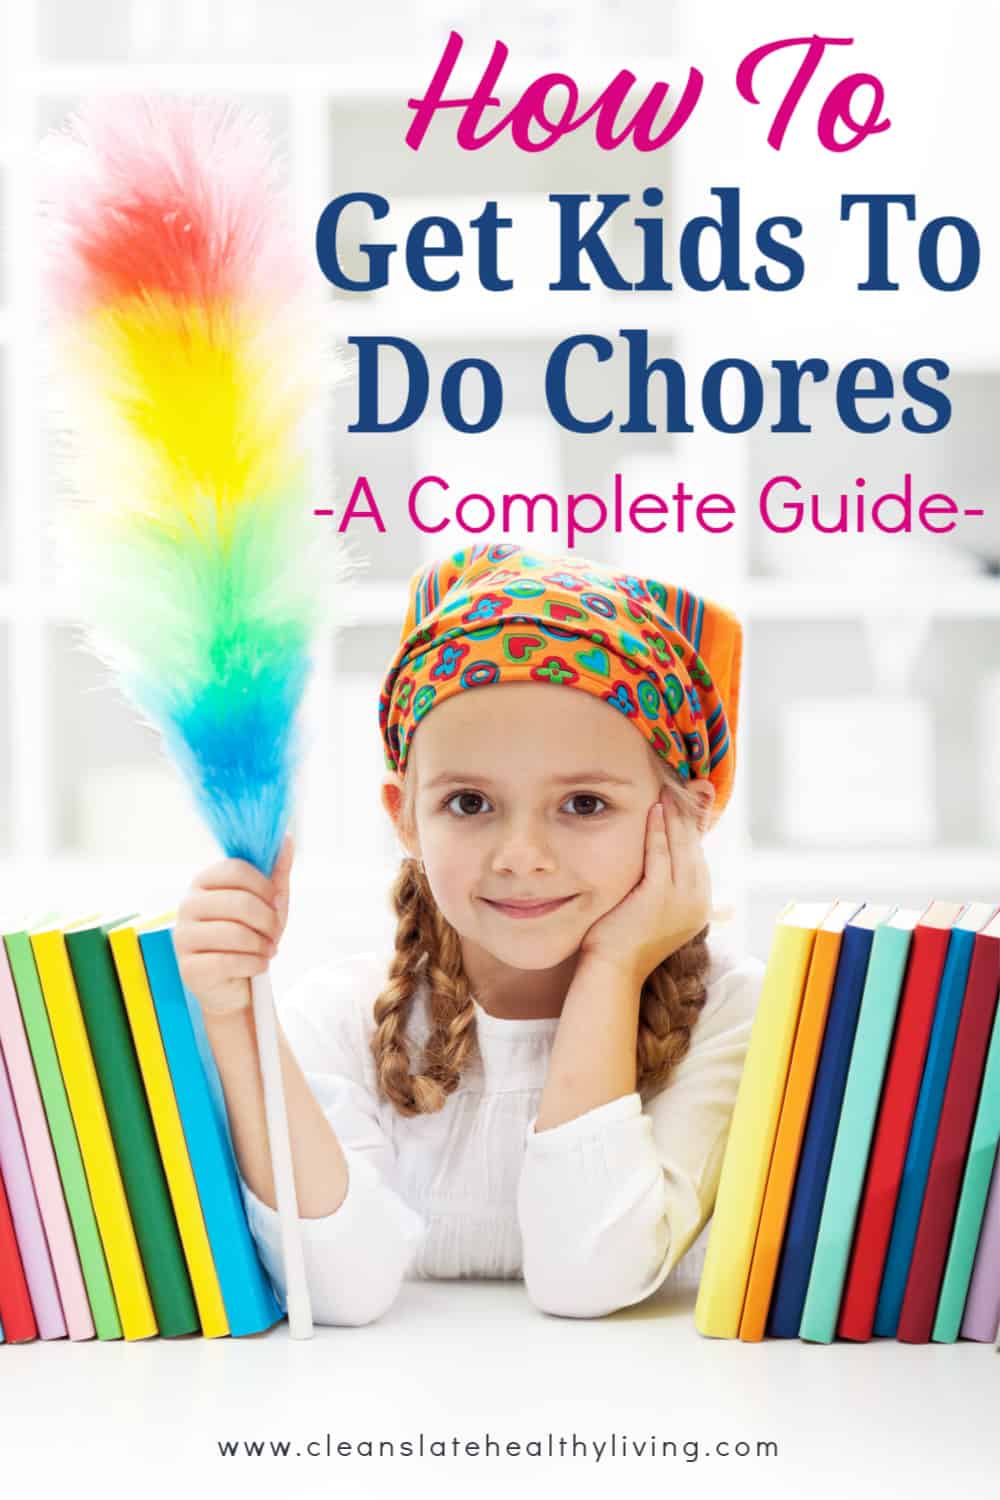 How to get kids to do chores. A complete guide.